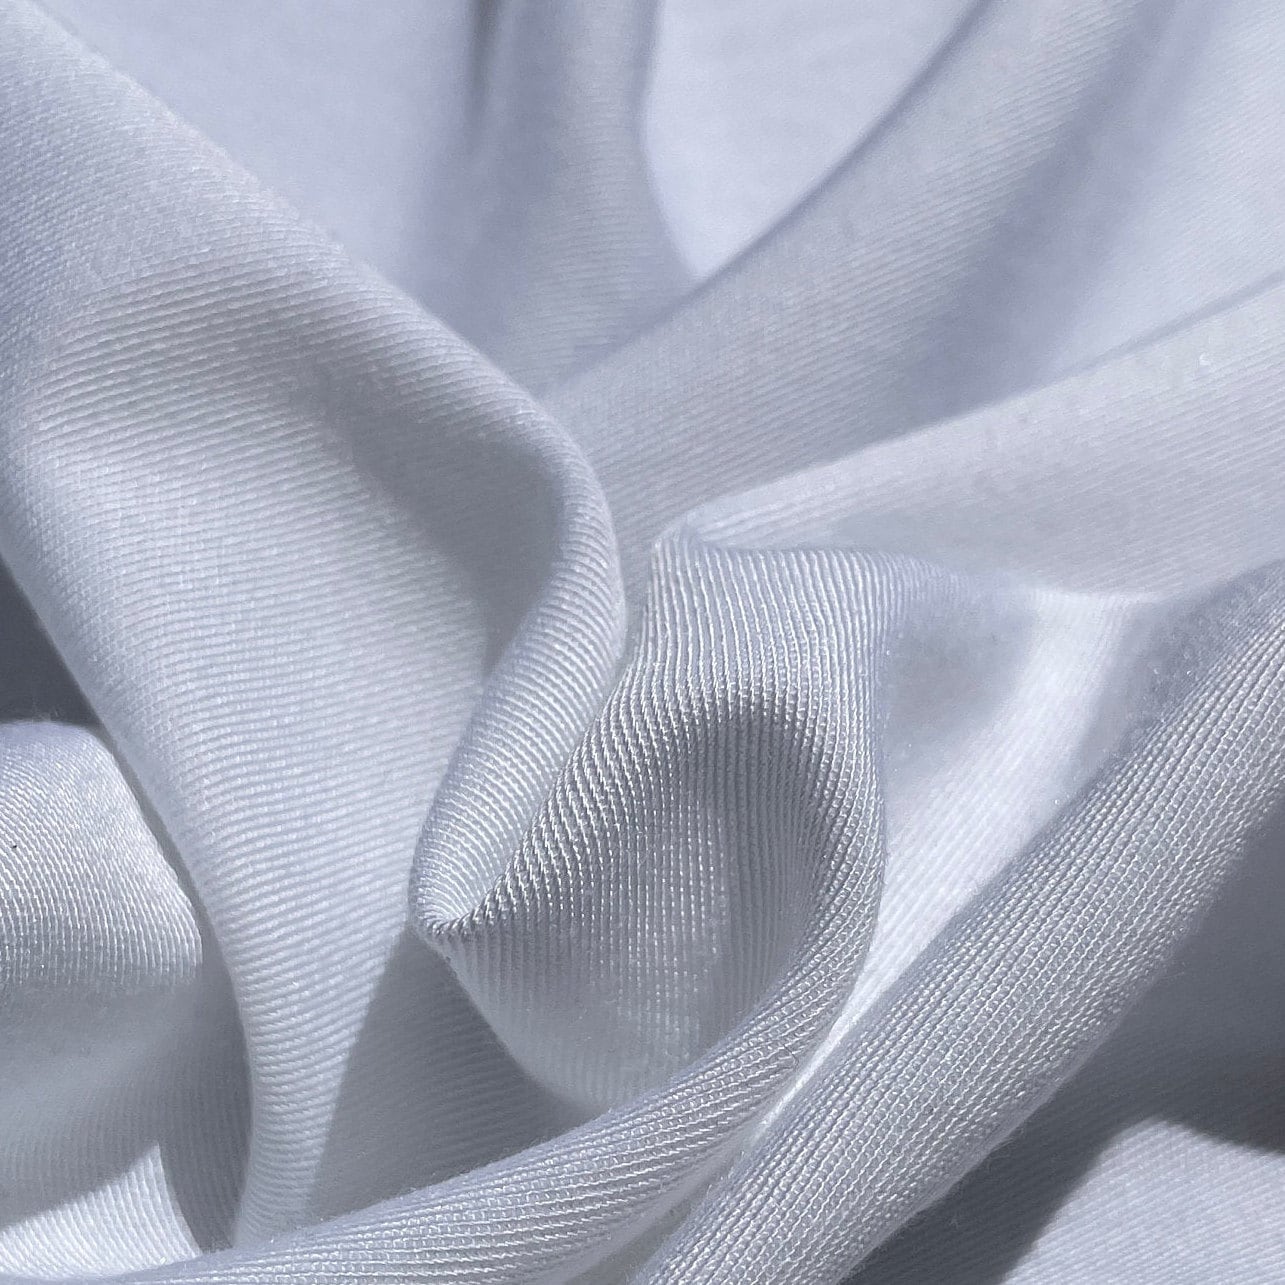 Difference Between Polyester and Rayon